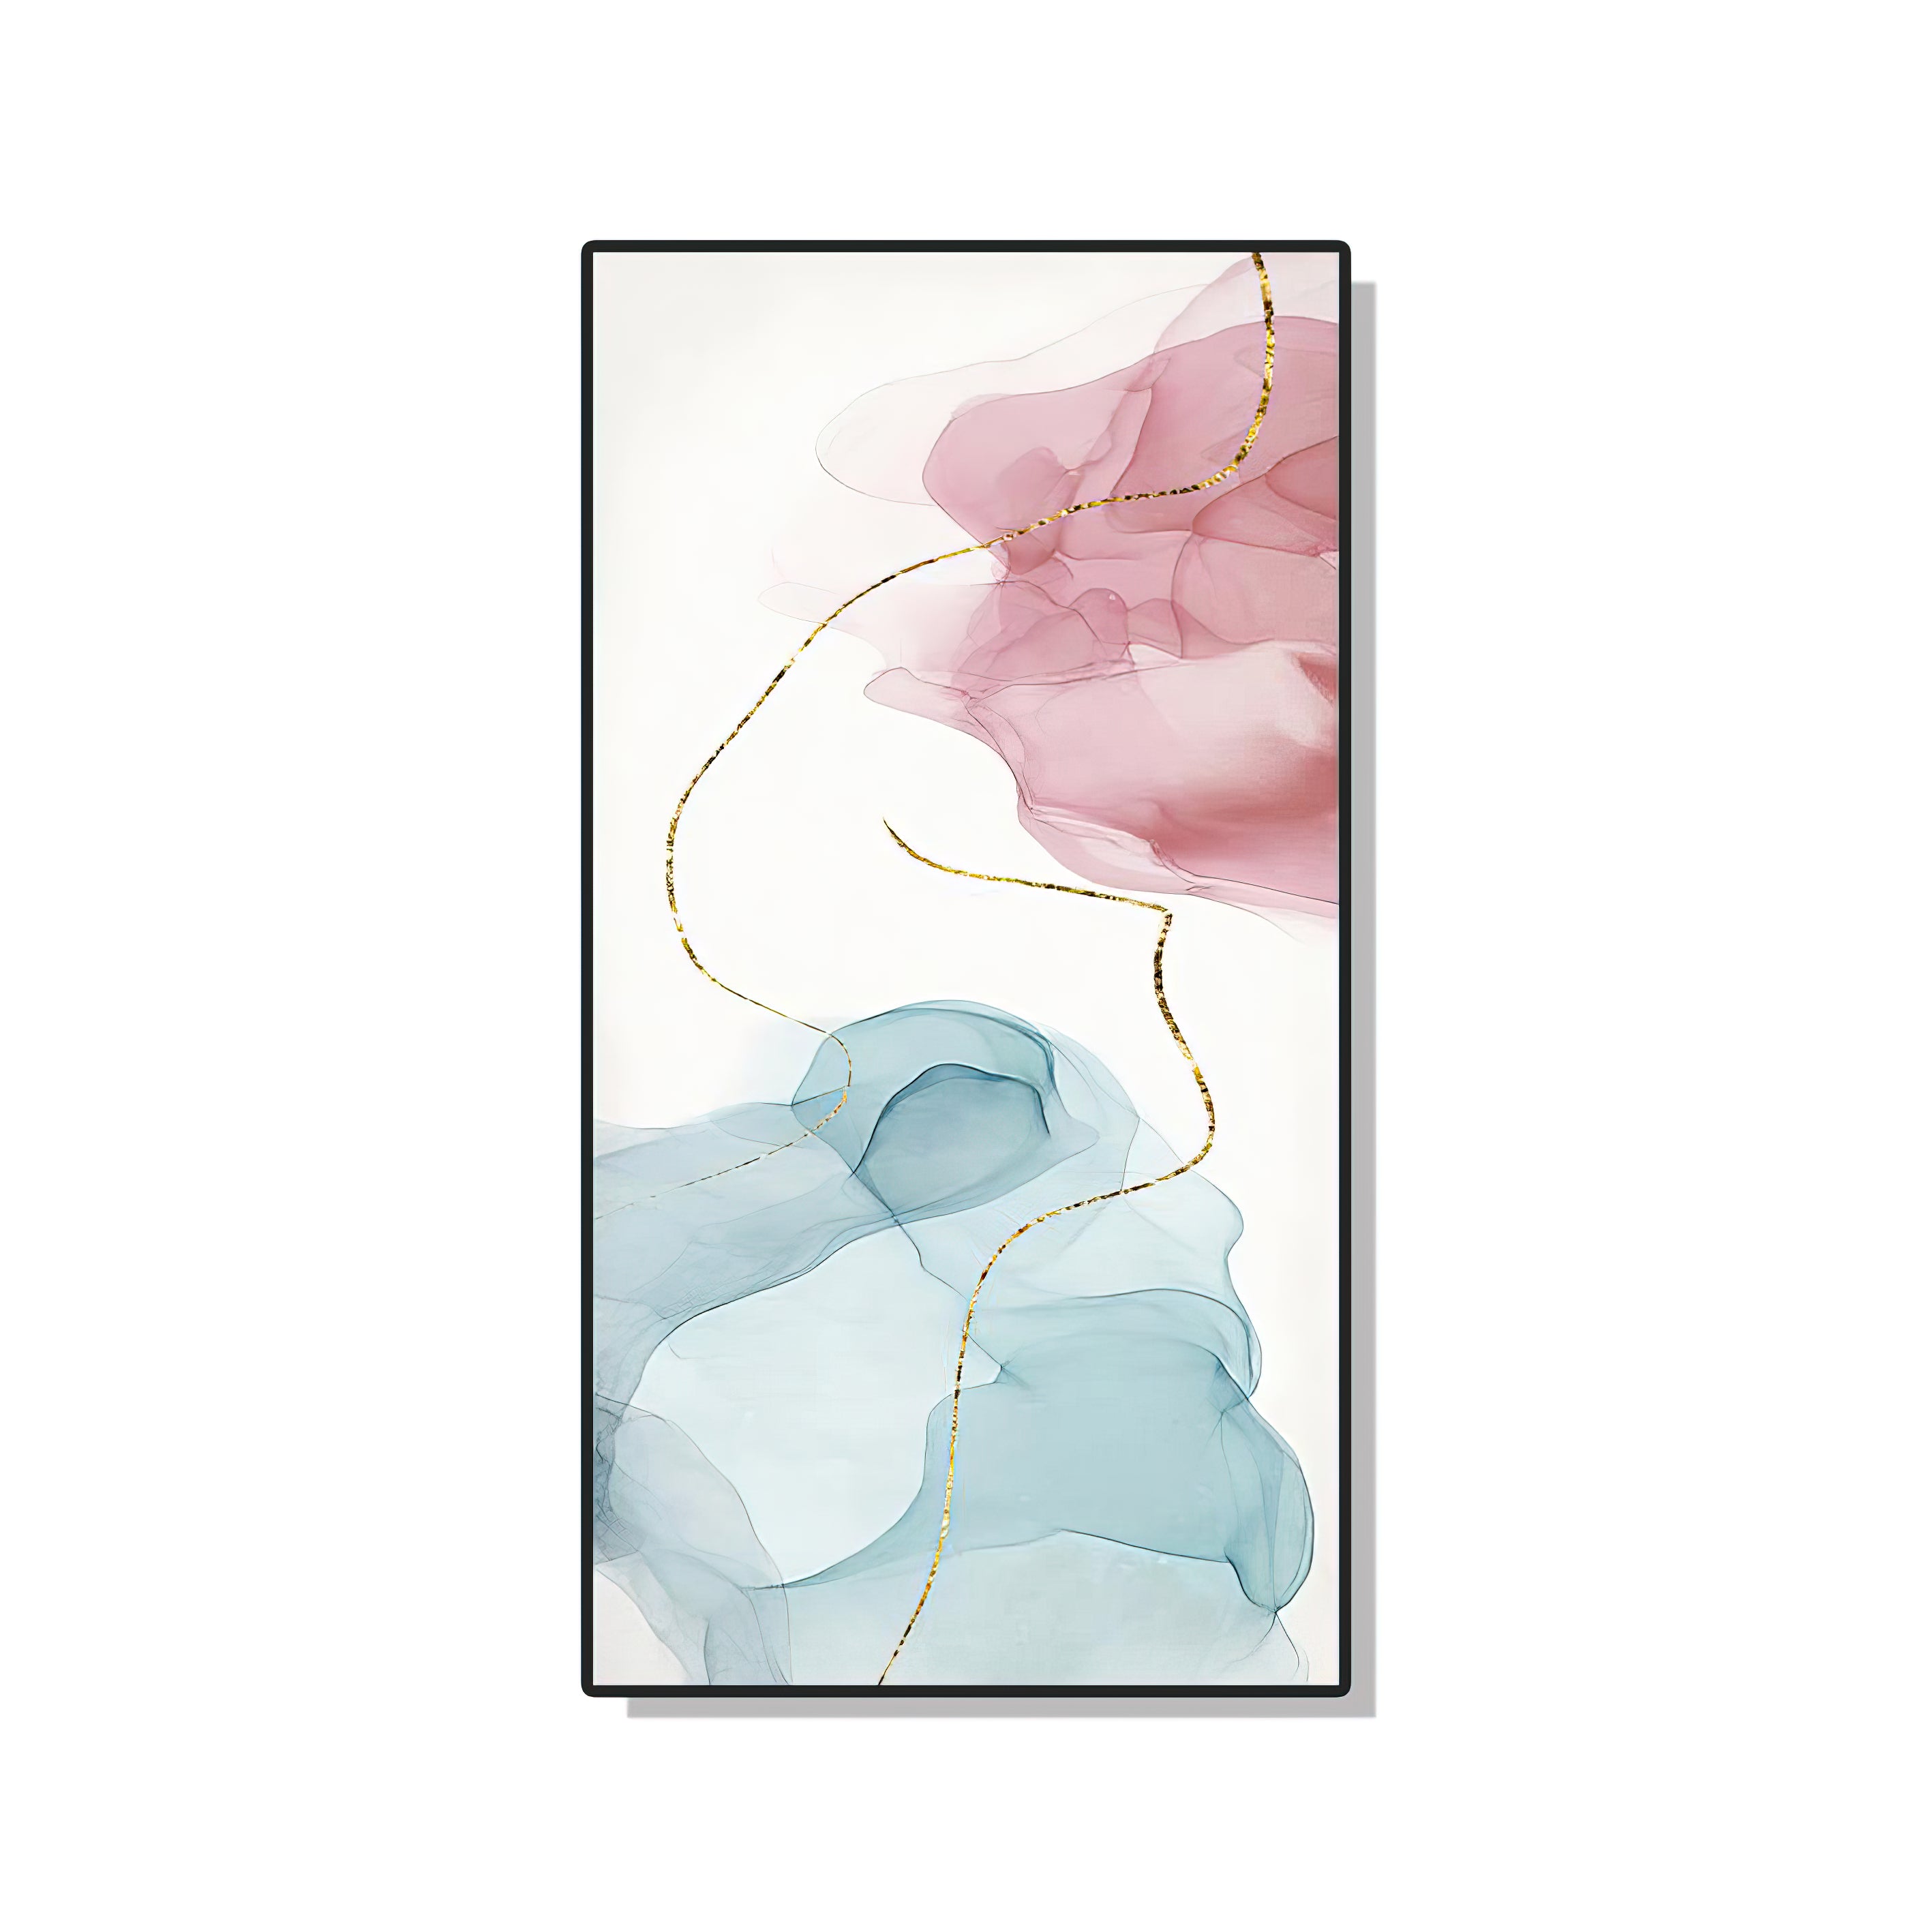 Pinky Bluish Light Theme Abstract Wall Painting - 50x100 cm Artwork Home Decor crystal porcelain Framed Large wall wall art wall accents